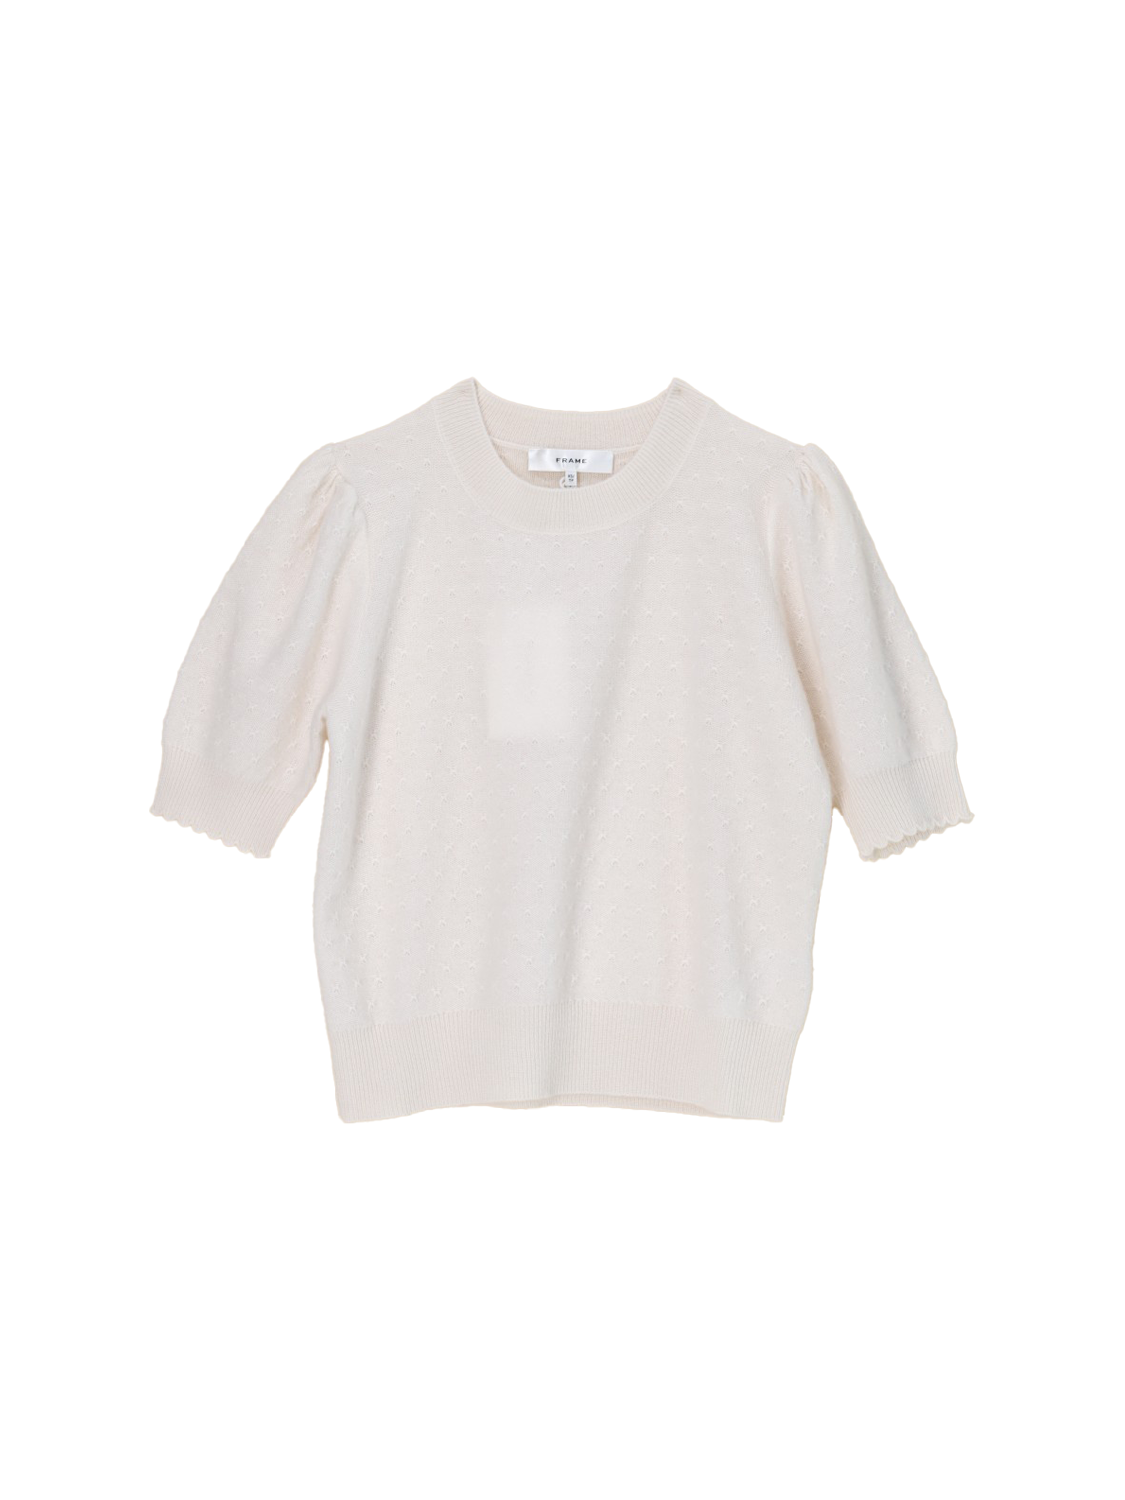 Pointelle – short-sleeved cashmere sweater 